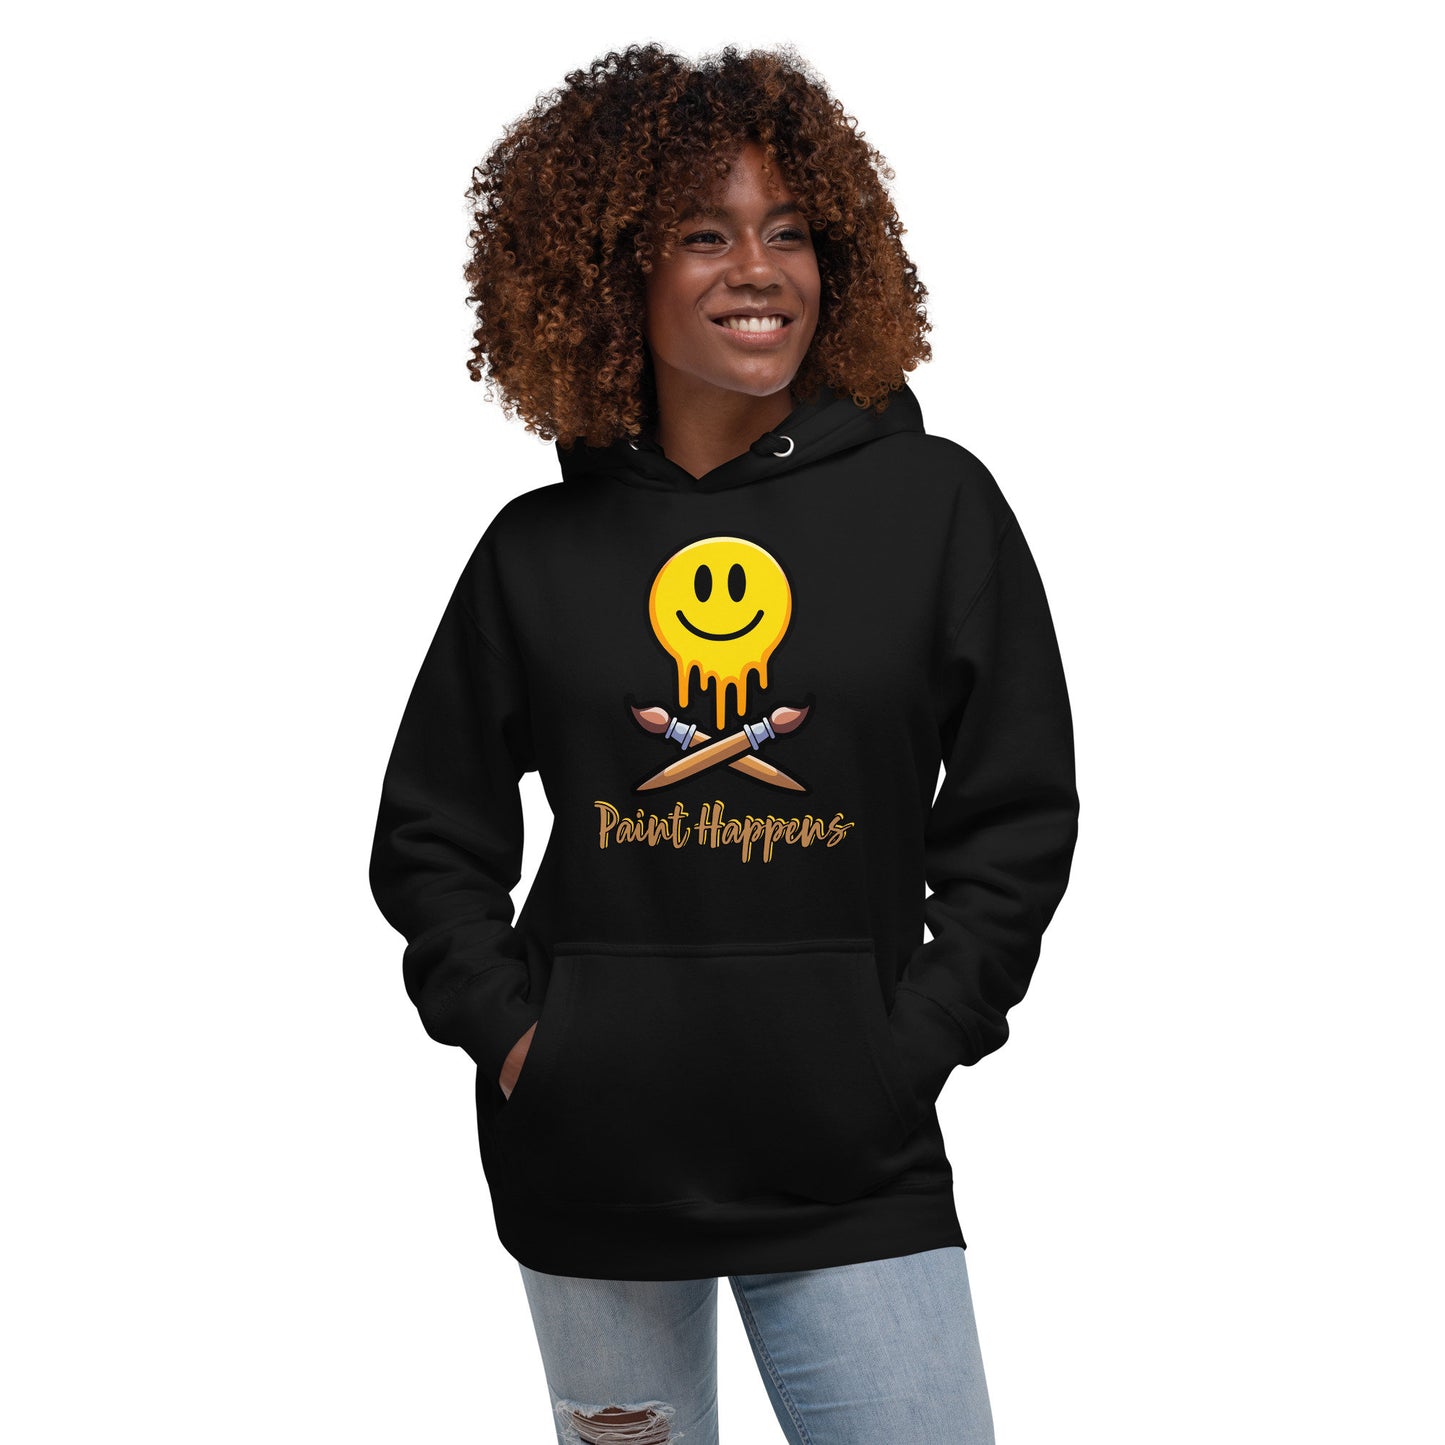 The Grinning Painter Unisex Hoodie